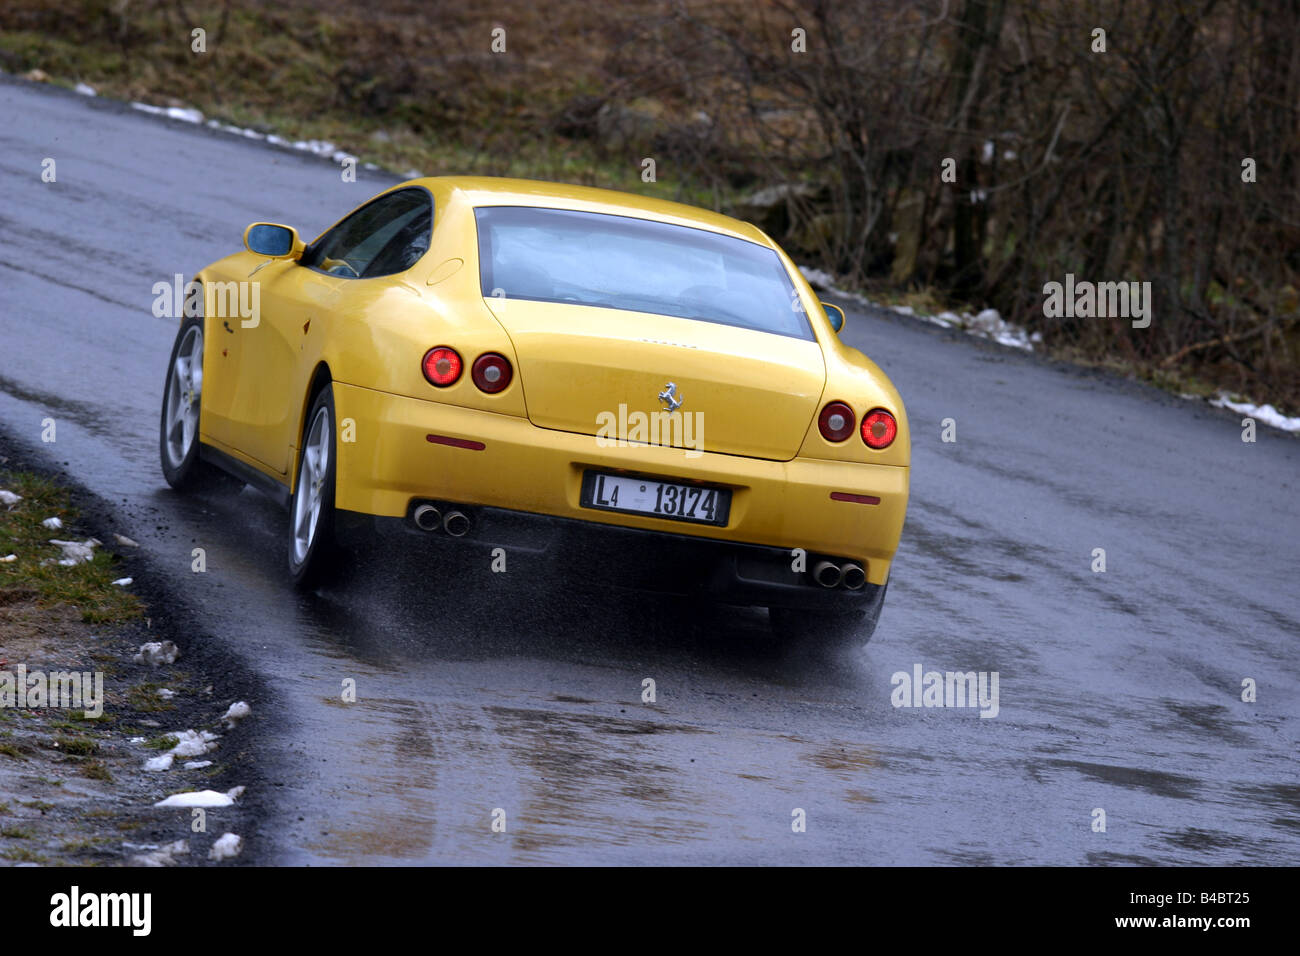 Car, Ferrari 612 Sapprox.lietti, roadster, model year 2004-, coupe/Coupe, yellow, driving, diagonal from the back, rear view, Cu Stock Photo